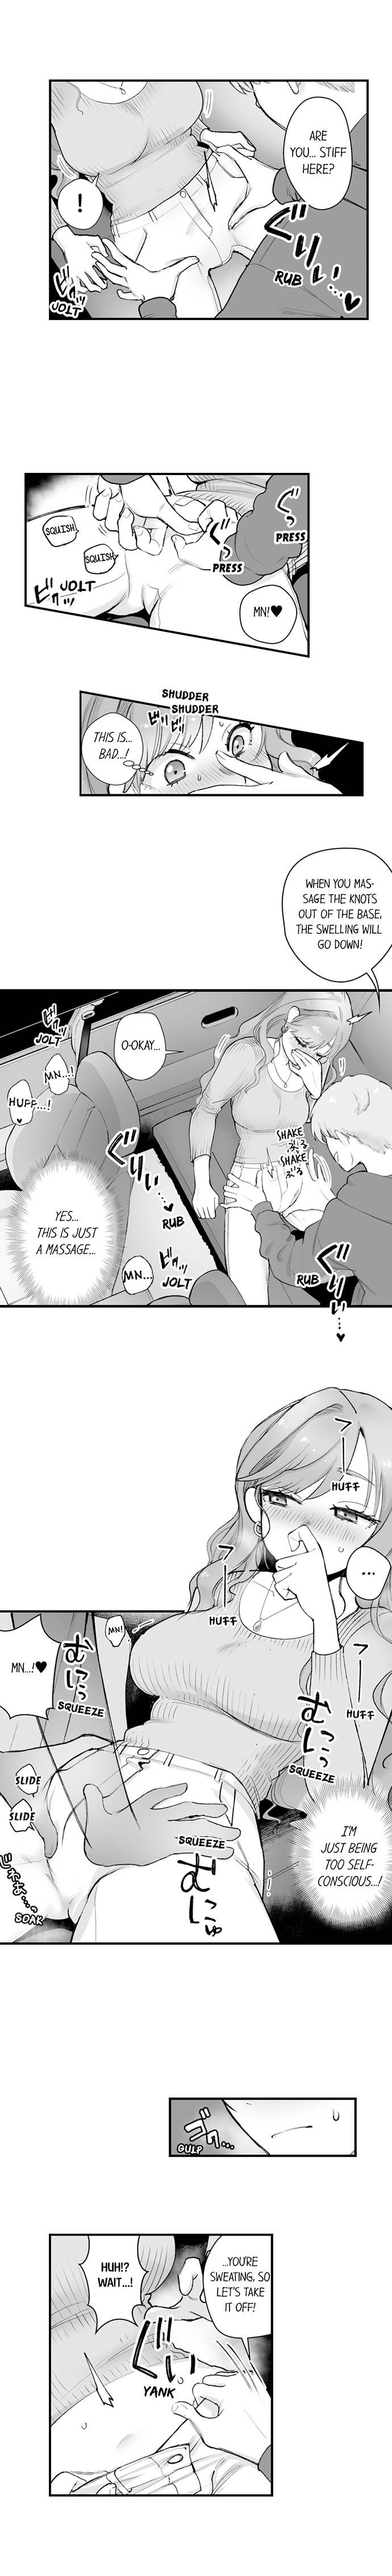 The Massage ♂♀ The Pleasure of Full Course Sex - Chapter 8 Page 5